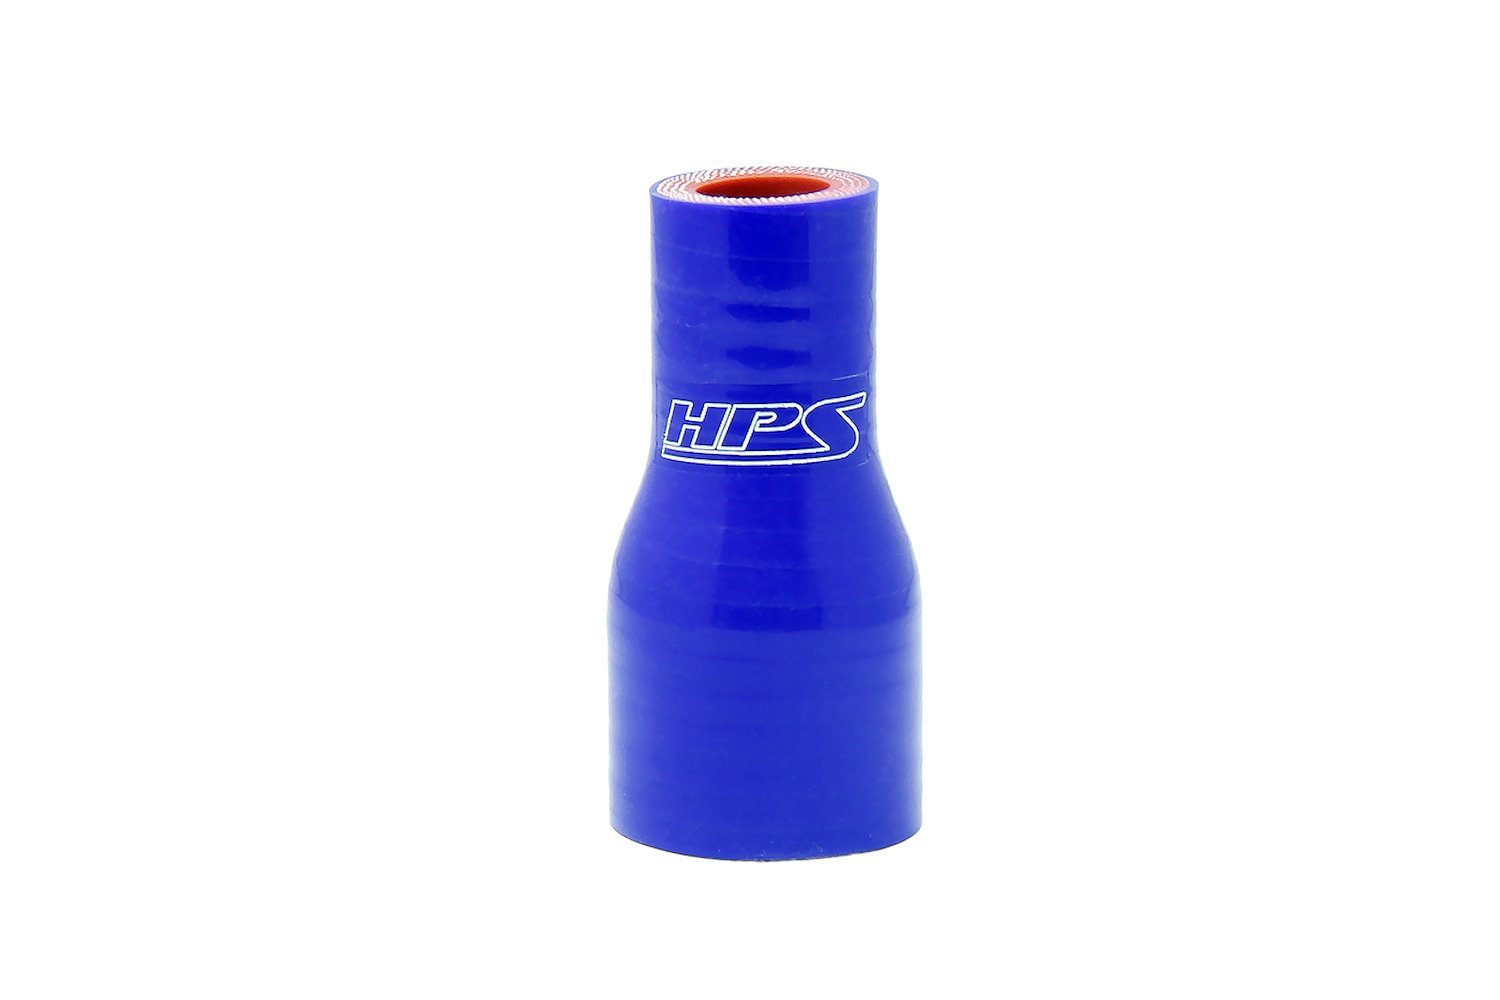 HTSR-125-187-BLUE Silicone Reducer Hose, High-Temp 4-Ply Reinforced, 1-1/4 in. - 1-7/8 in. ID, 3 in. Long, Blue